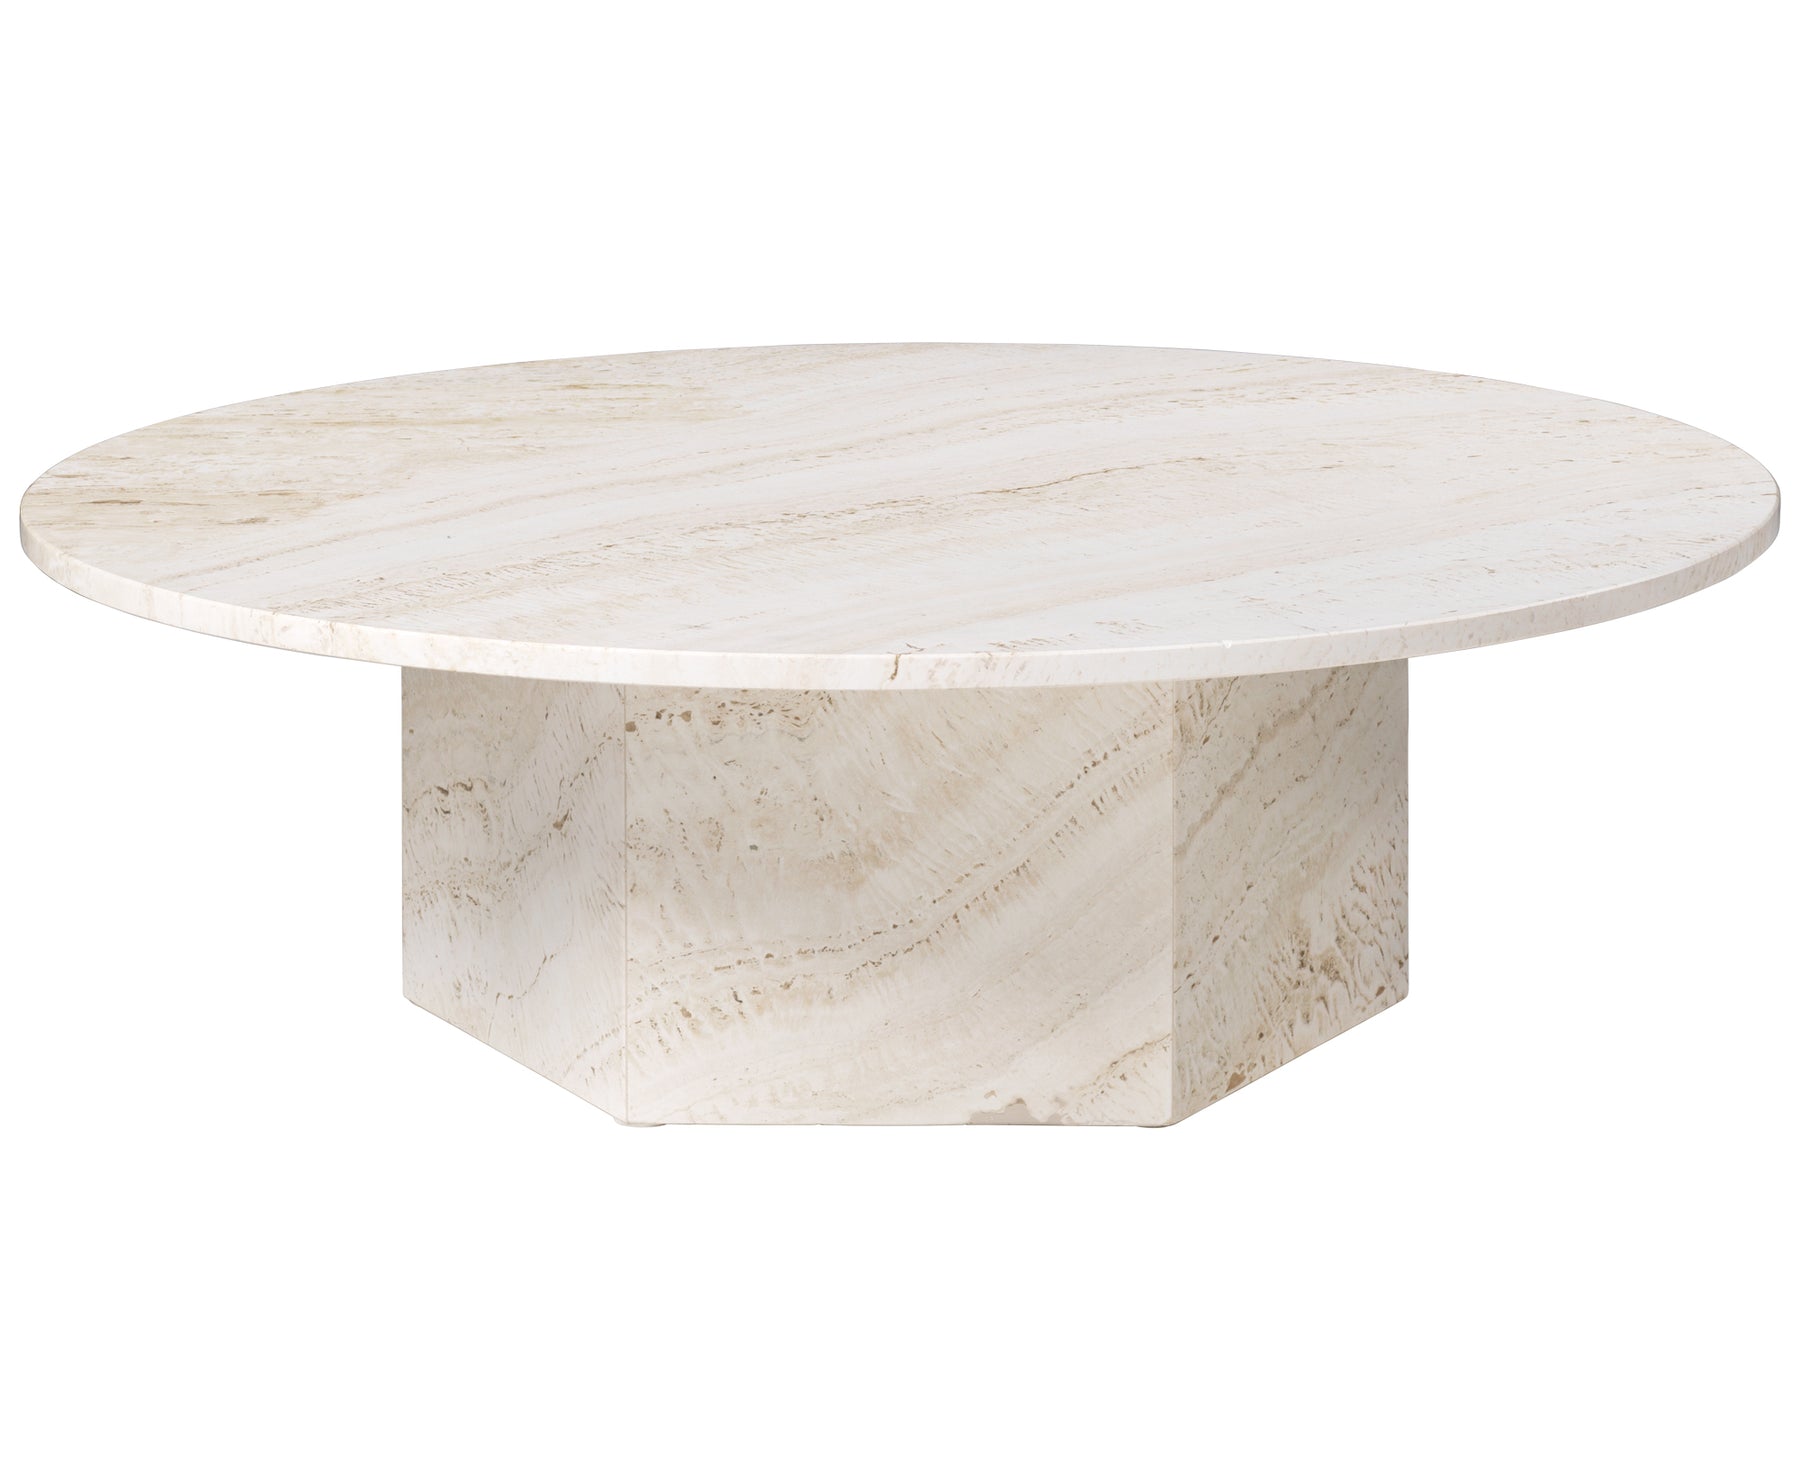 Epic Coffee Table in White Travertine | DSHOP